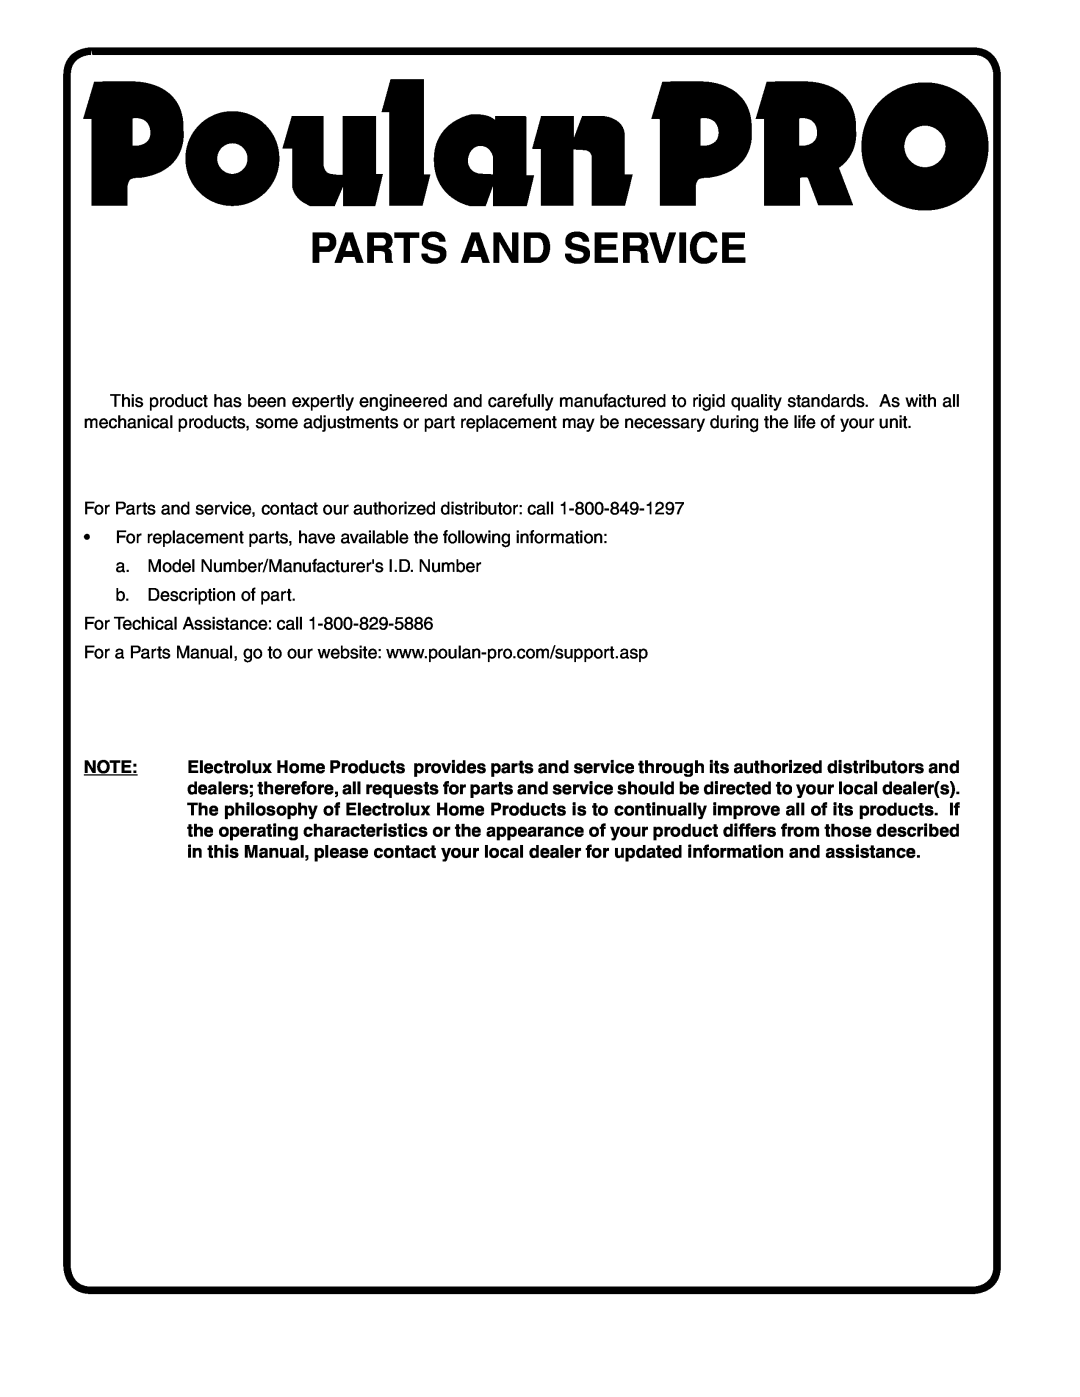 Poulan 194632 manual Parts And Service 